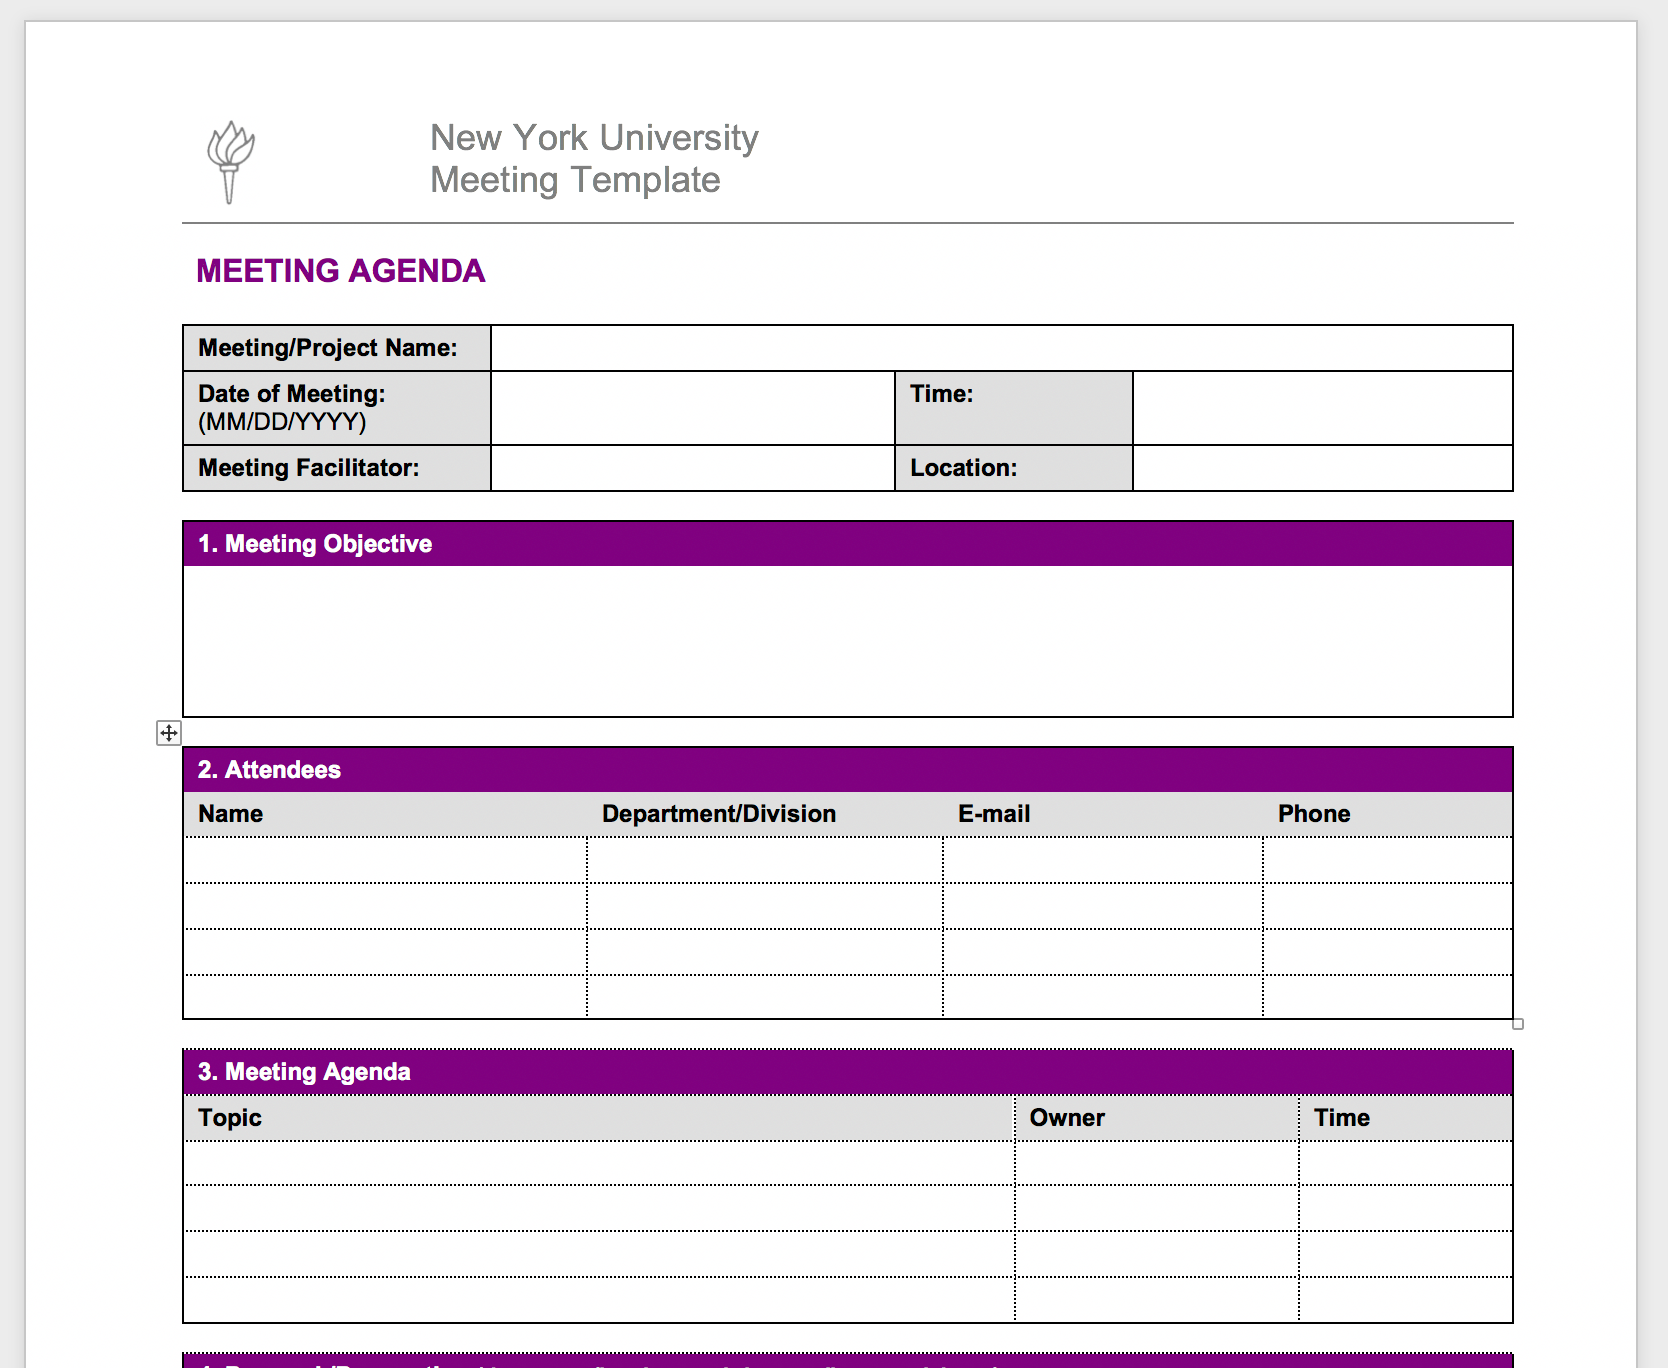 Meeting Agenda Template Excel from knowtworthy.com